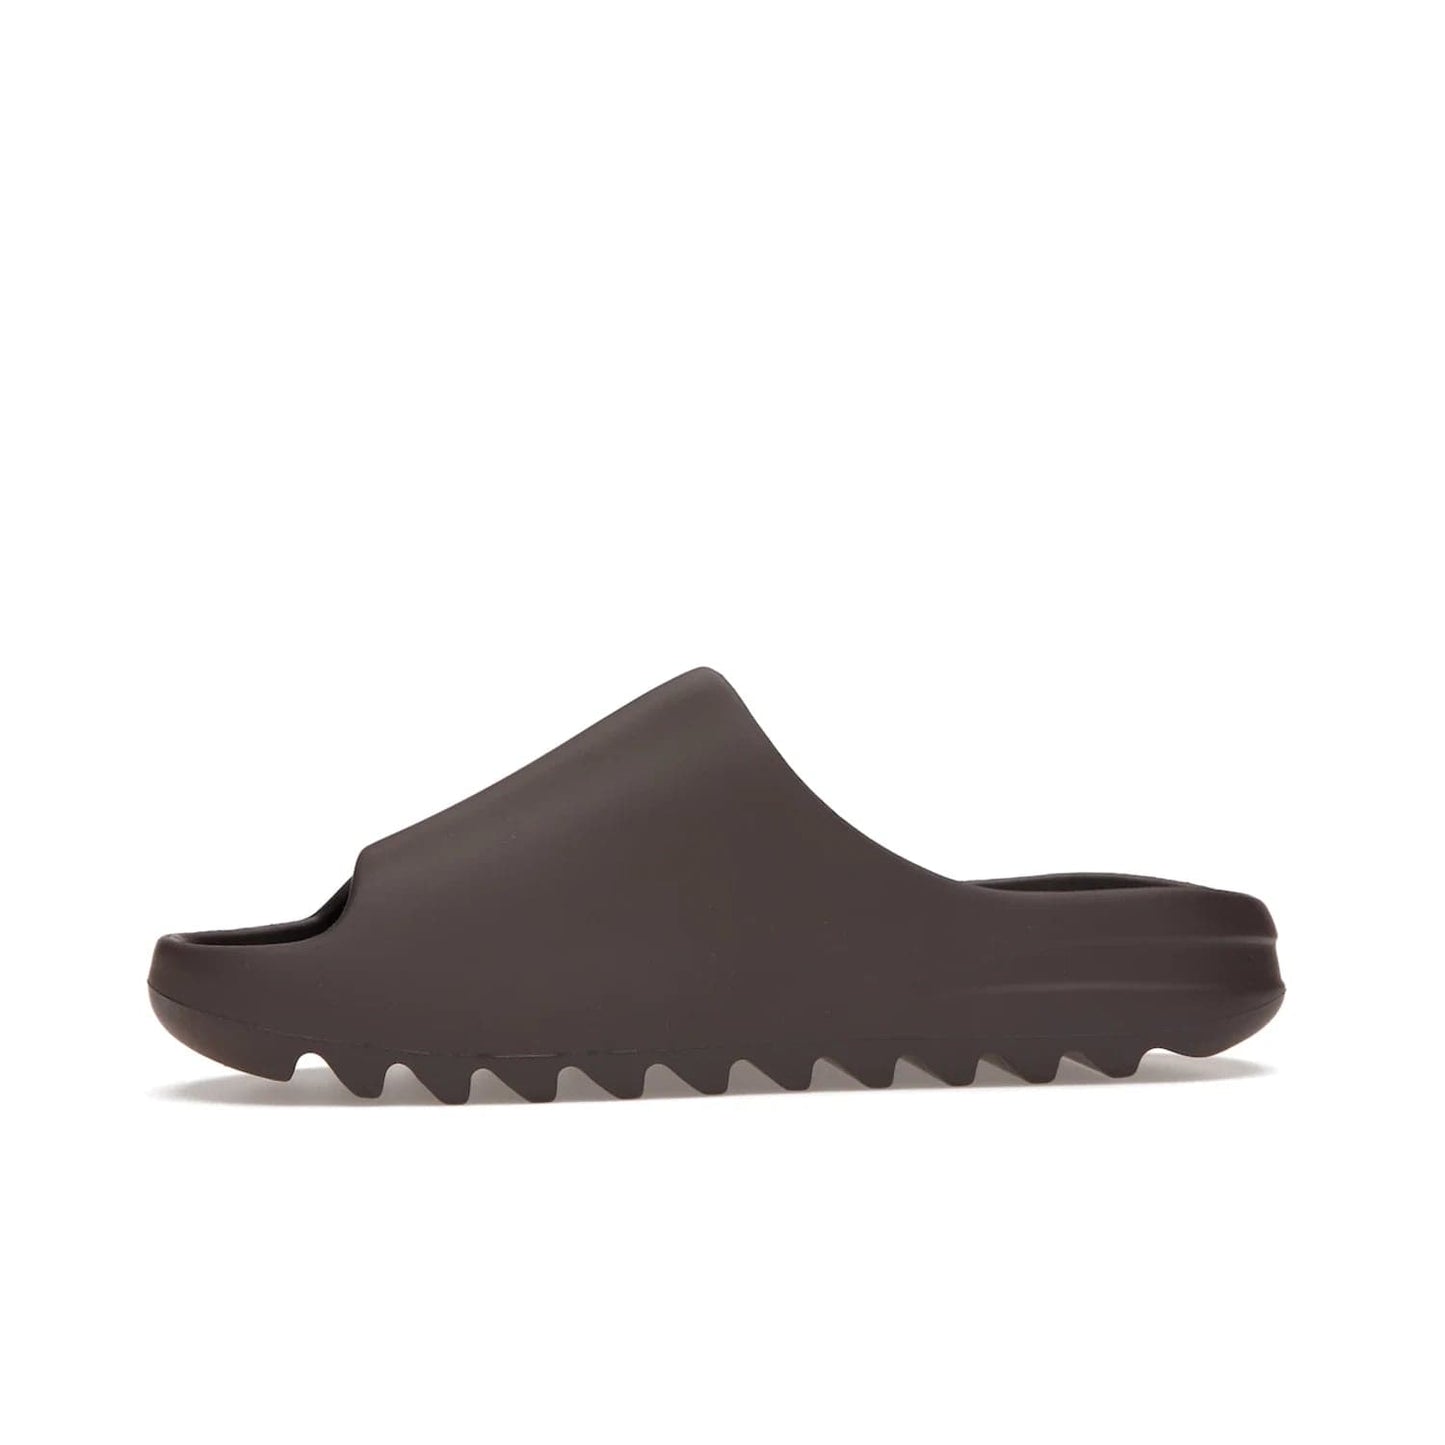 adidas Yeezy Slide Soot - Image 18 - Only at www.BallersClubKickz.com - Shop the Yeezy Slide Soot sneaker by Adidas, a sleek blend of form and function. Monochrome silhouette in Soot/Soot/Soot. Lightweight EVA foam offers comfort and durability. Get the must-have style today.